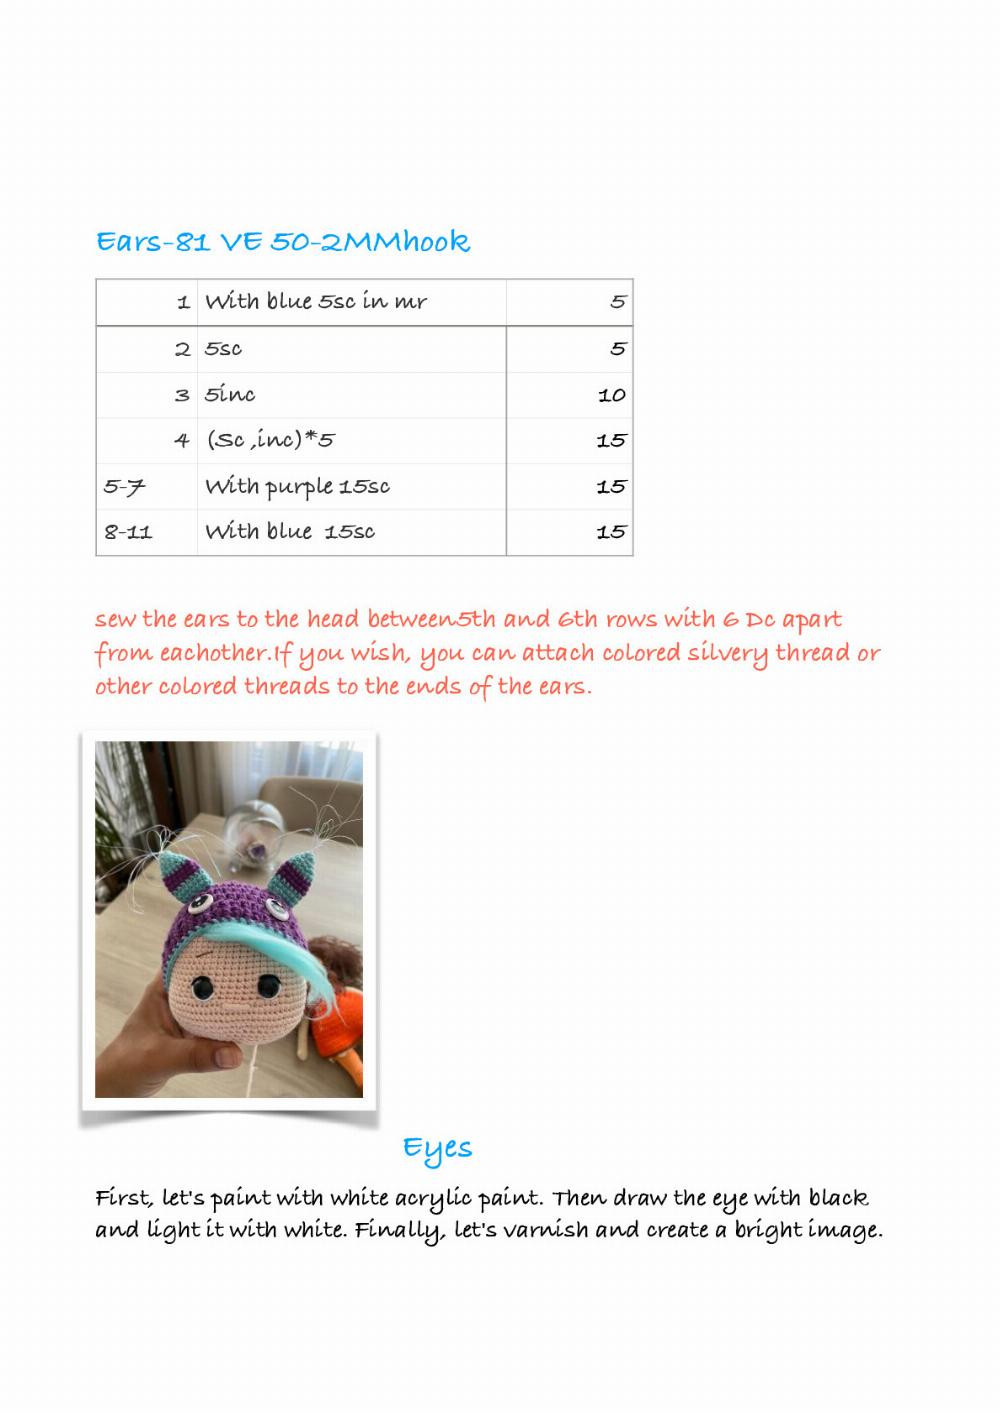 ALEX, Crochet pattern for a baby girl doll wearing overalls and a rabbit-eared hat